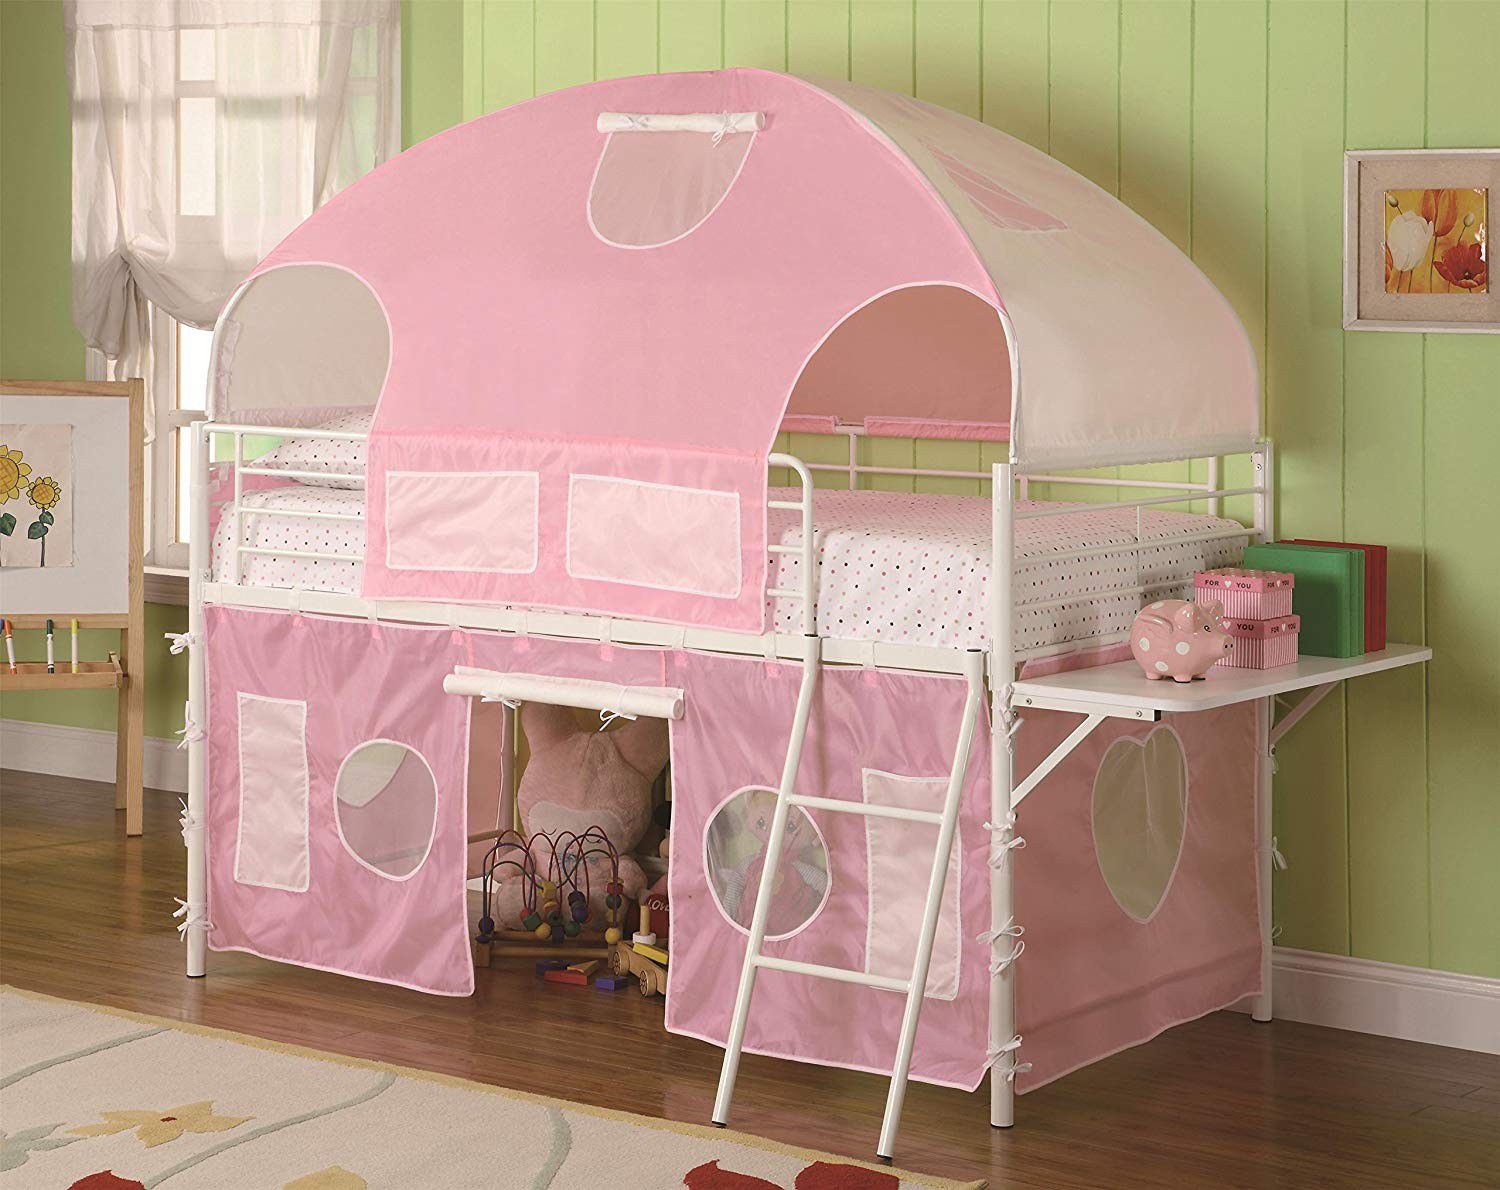 Sweetheart Tent Loft Bed, Pink/White new in box